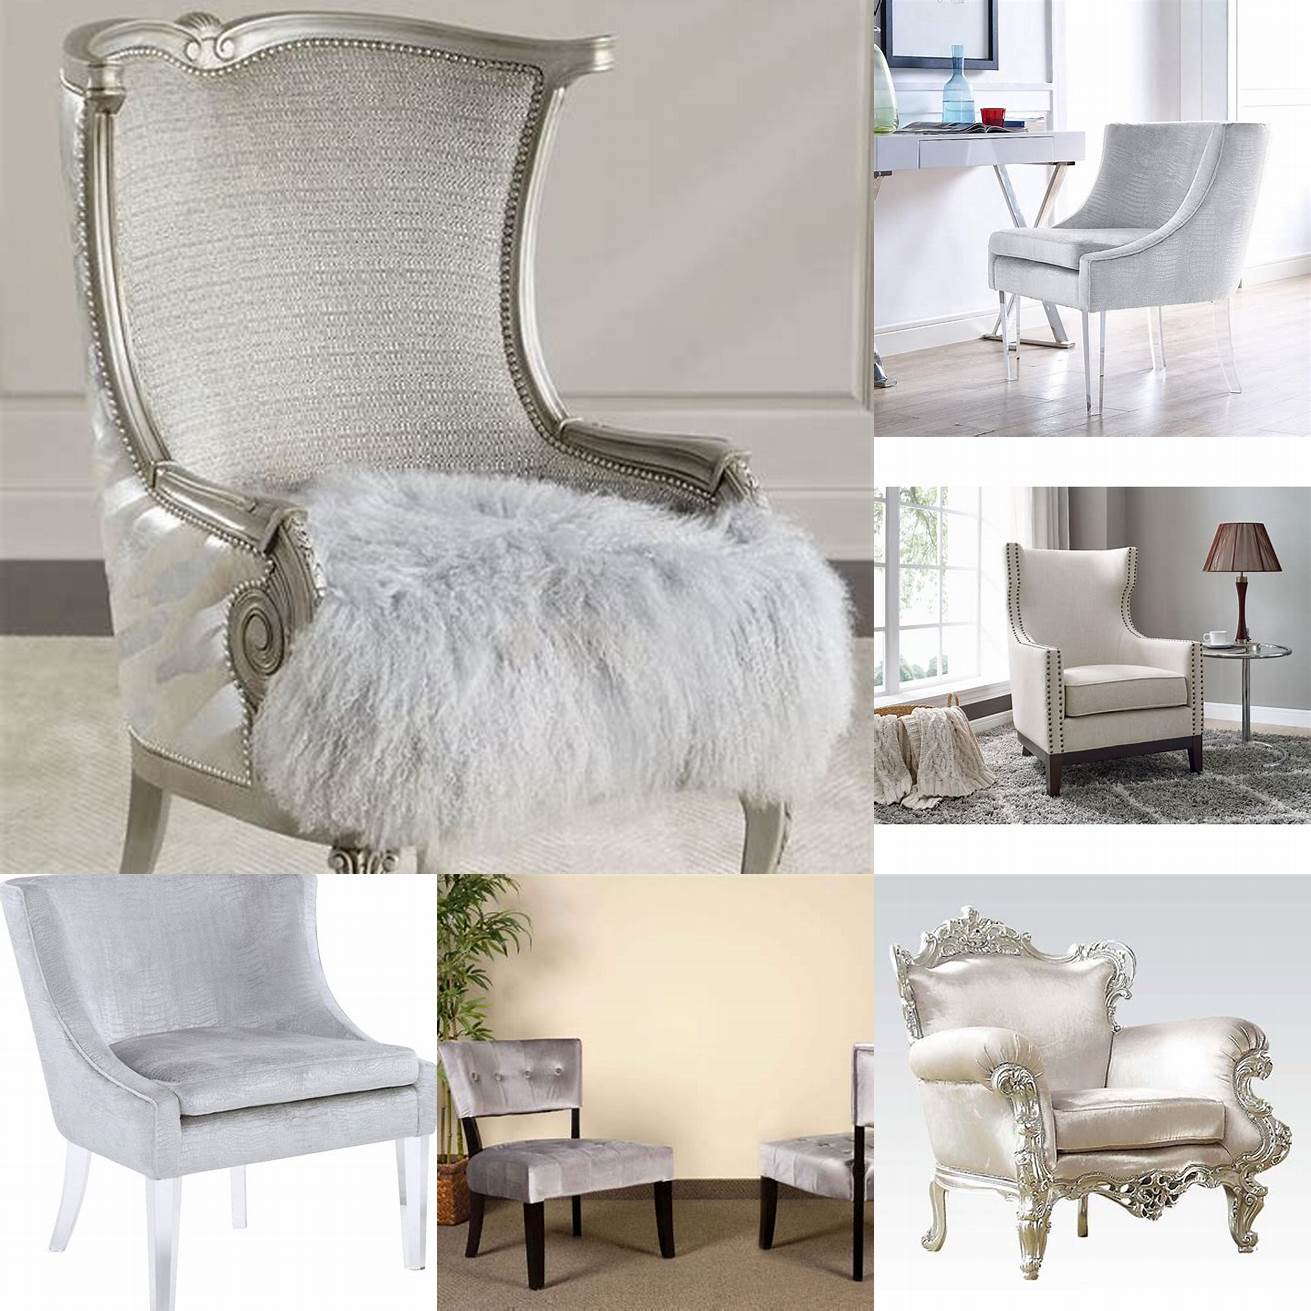 A silver accent chair can be a statement piece in any bedroom